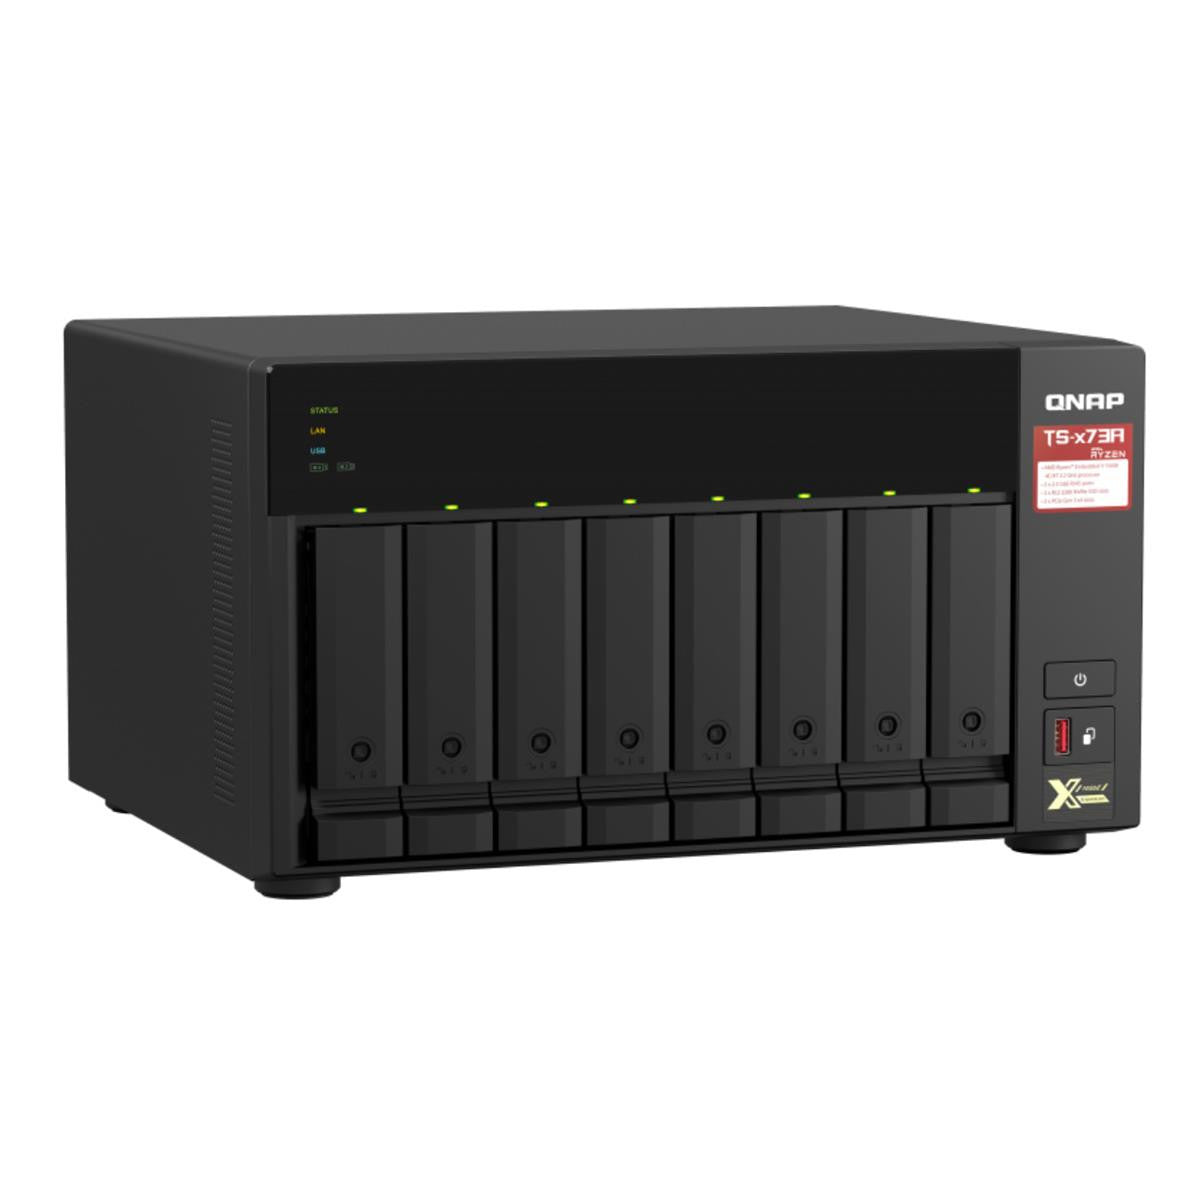 QNAP TS-873A 8-BAY NAS with 16GB DDR4 RAM and 16TB (8x2TB) Seagate Ironwolf NAS Drives Fully Assembled and Tested